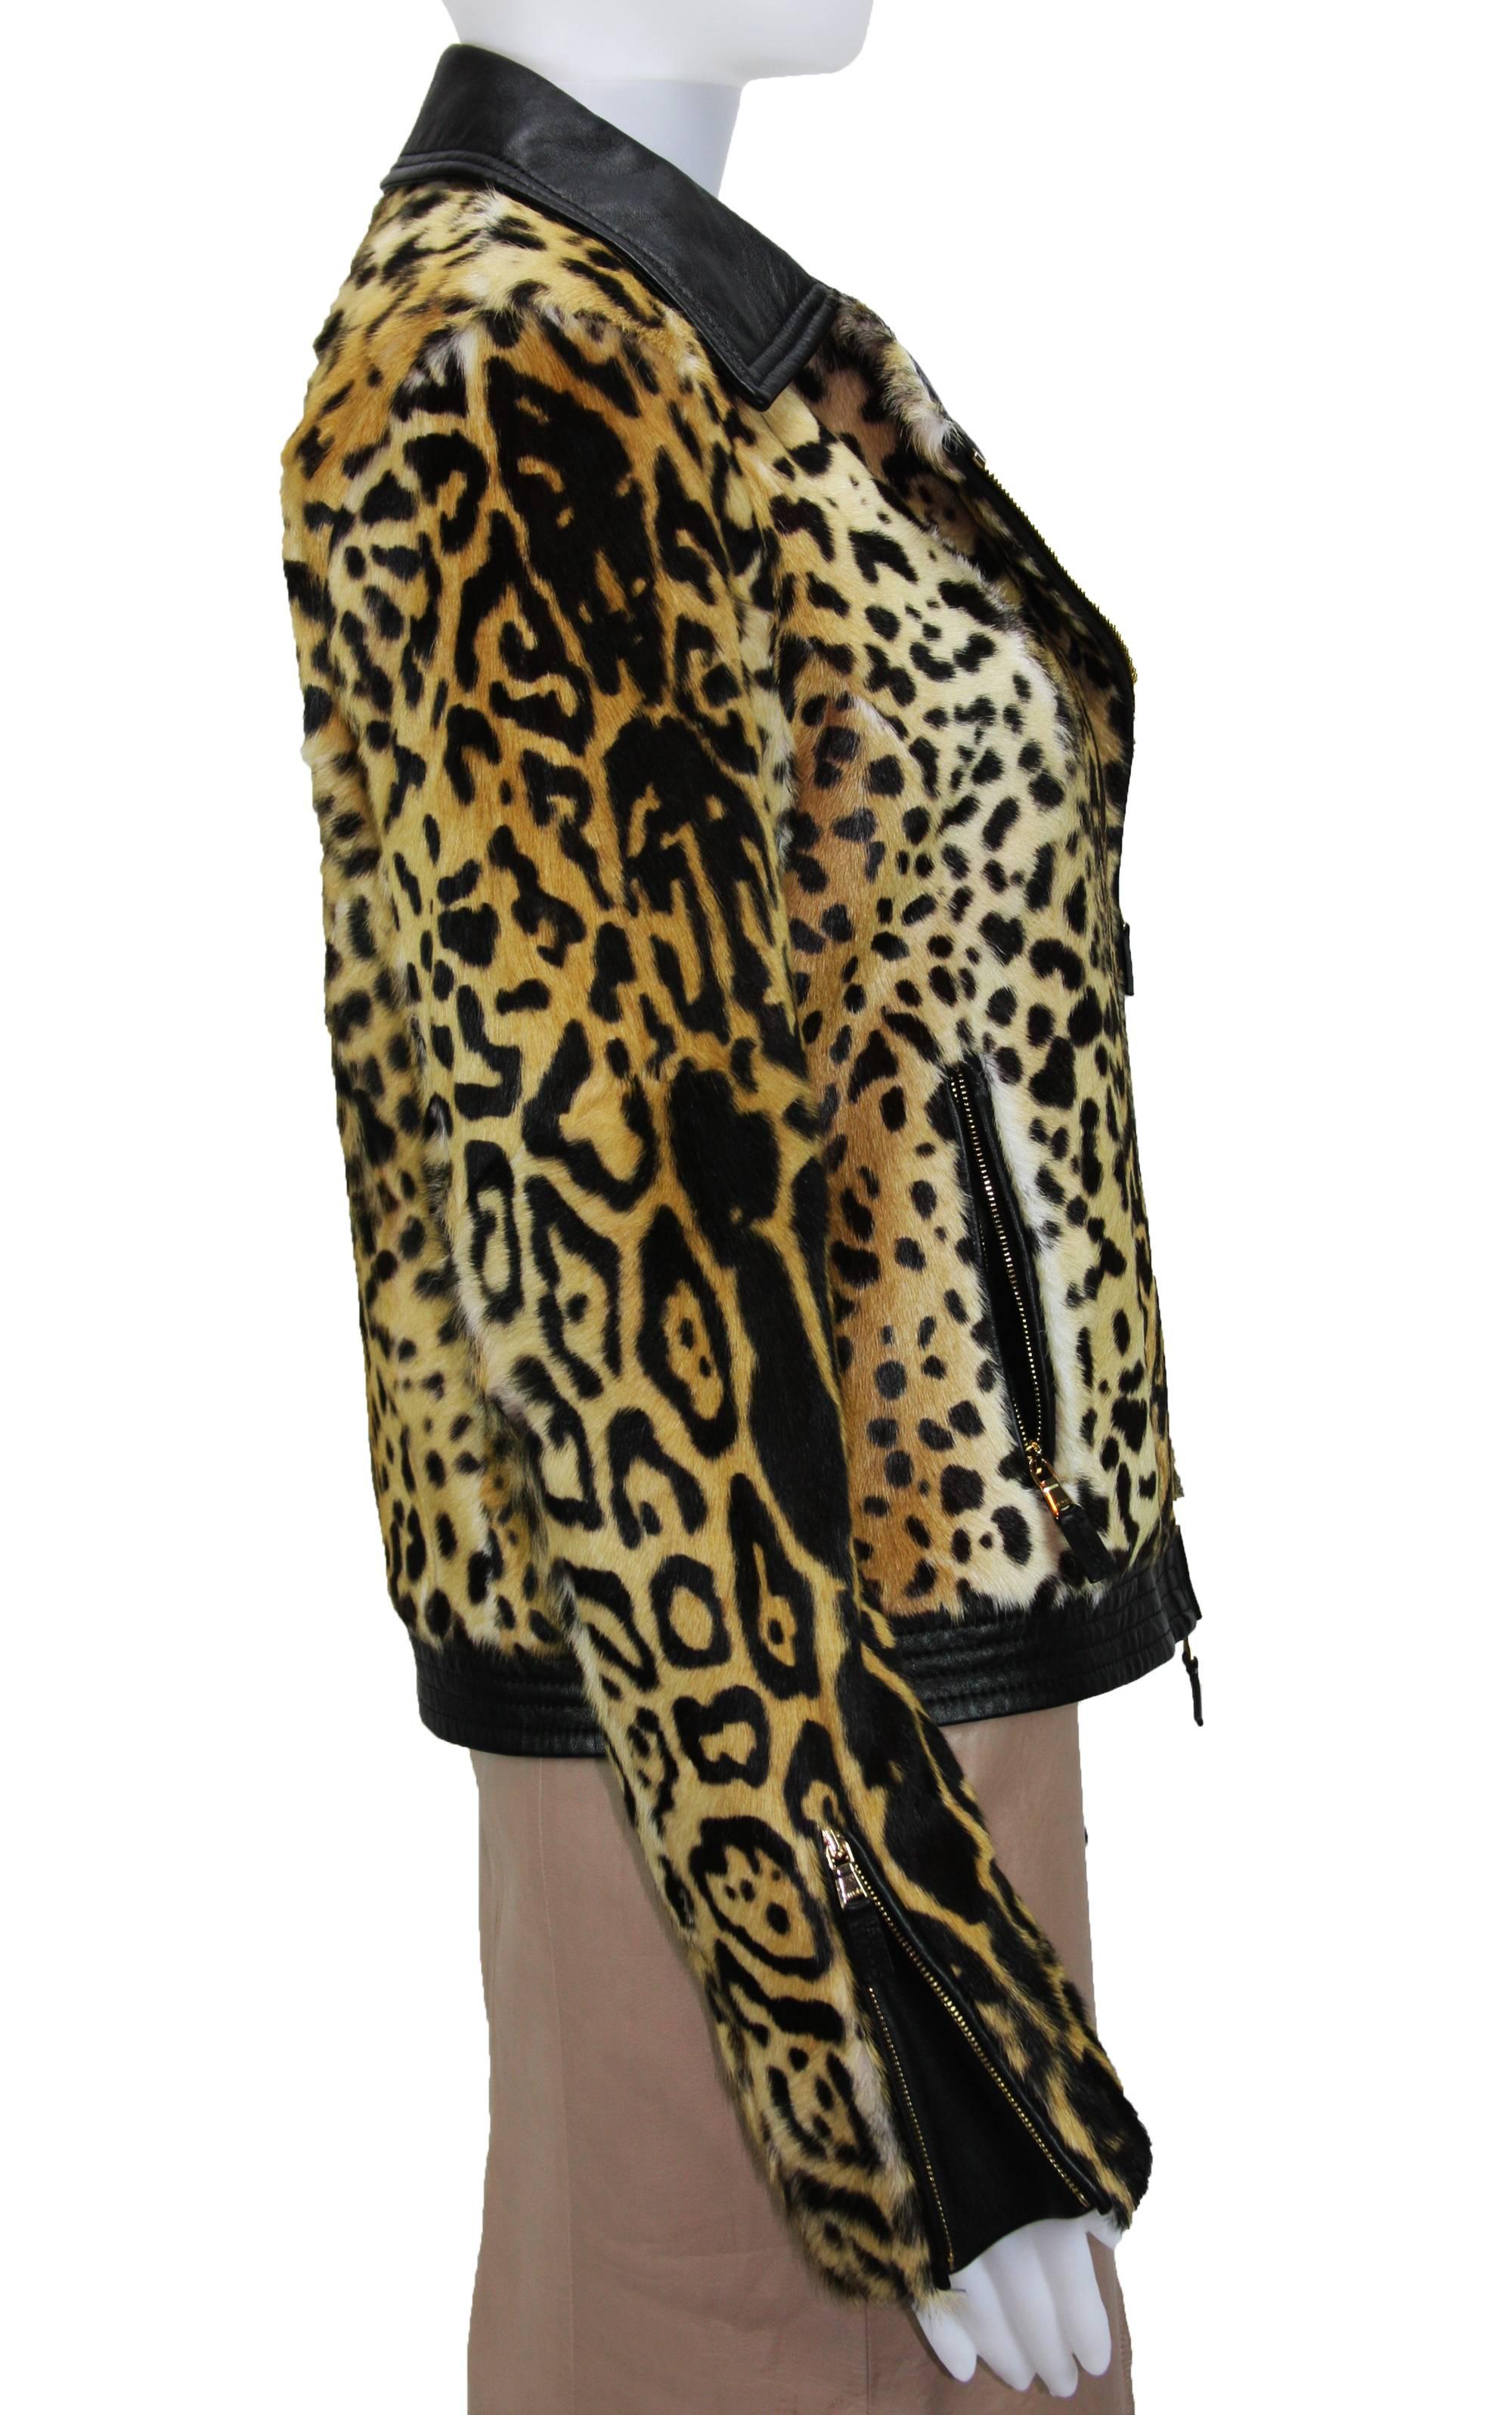 New Etro Women Fur Lamb Leopard Print Leather Moto Jacket  42 - US 6/8 In New Condition For Sale In Montgomery, TX